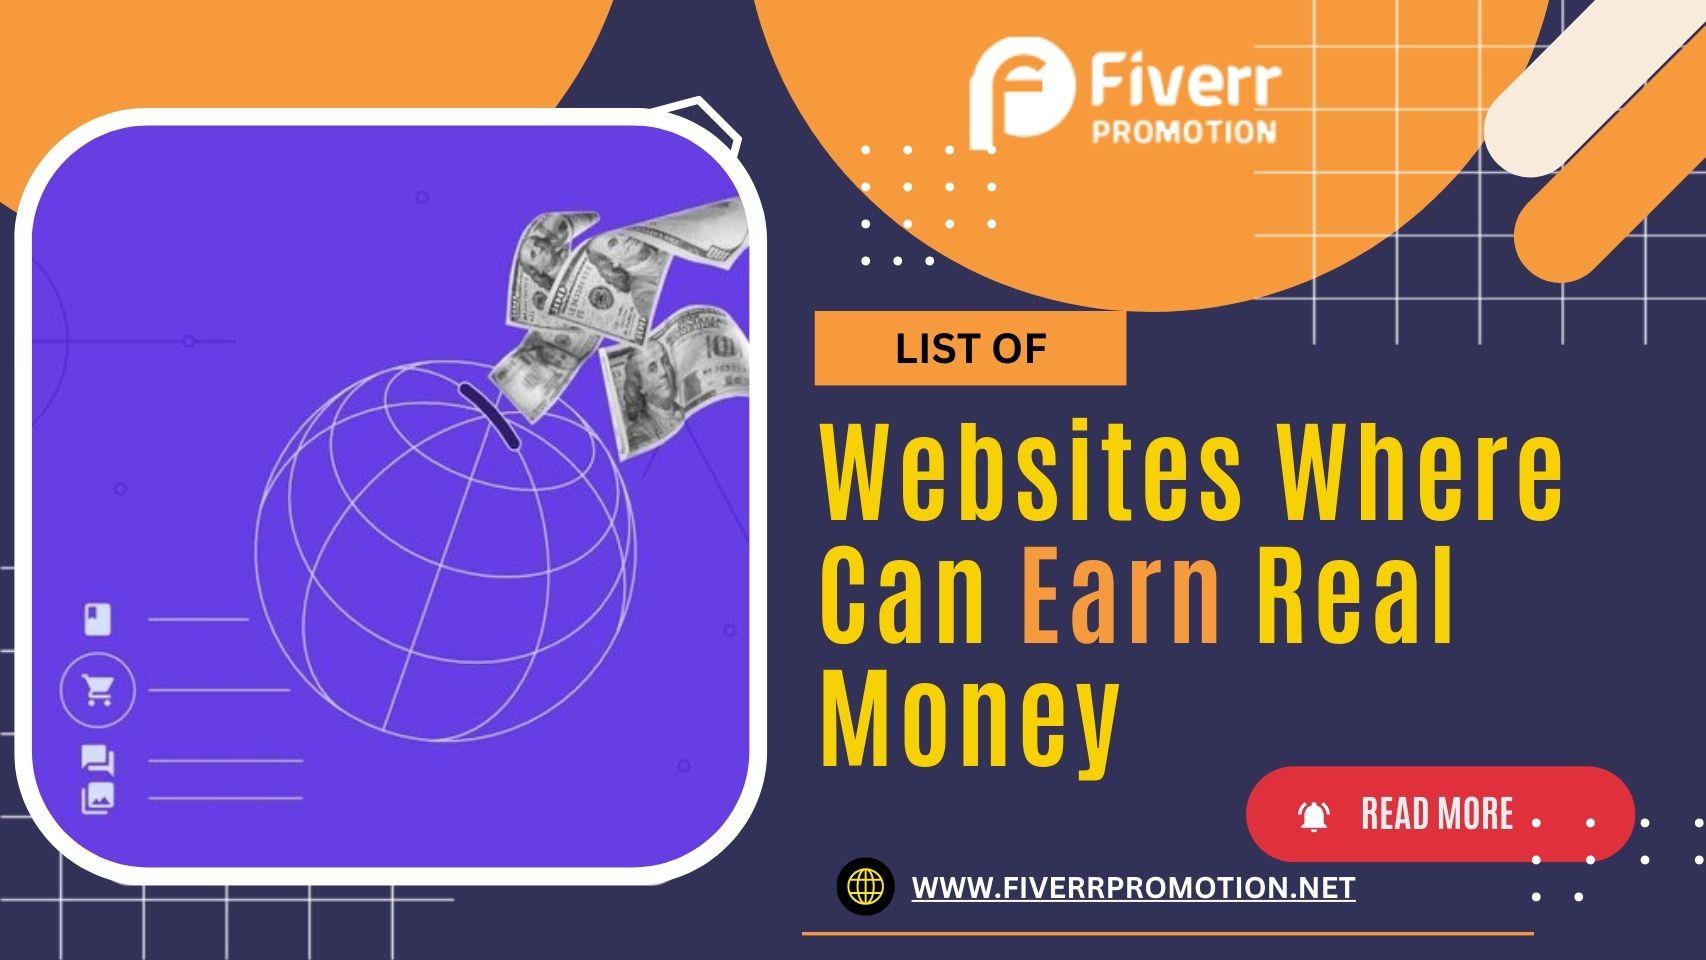 List of websites where can earn real money